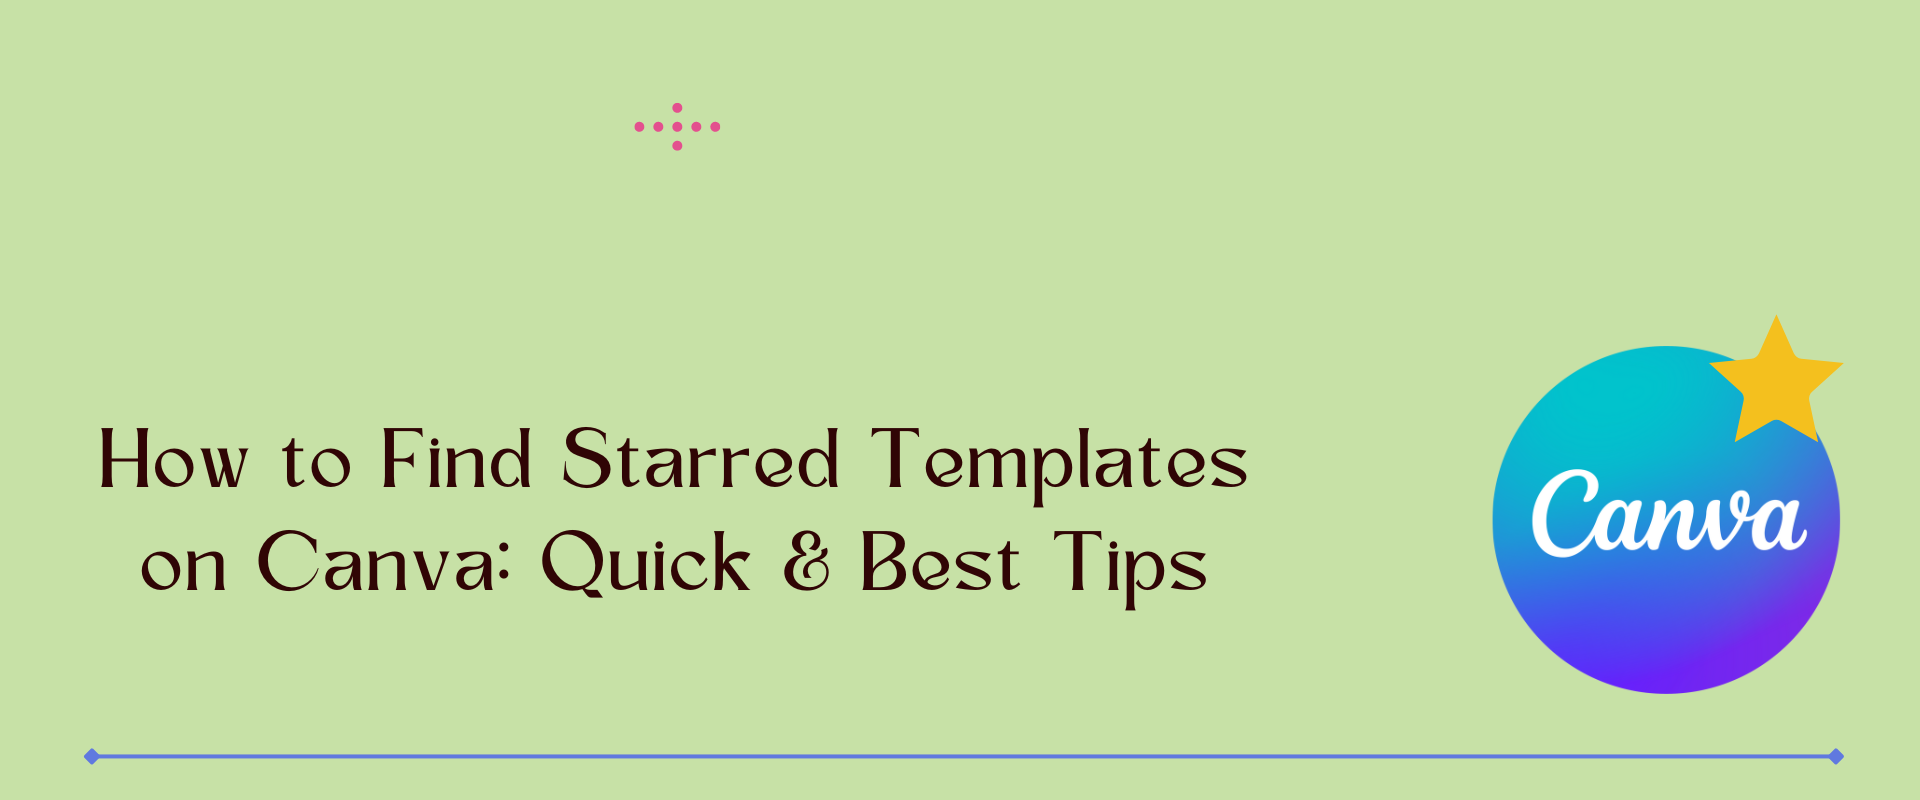 How to Find Starred Templates on Canva Quick & Best Tips Mockey